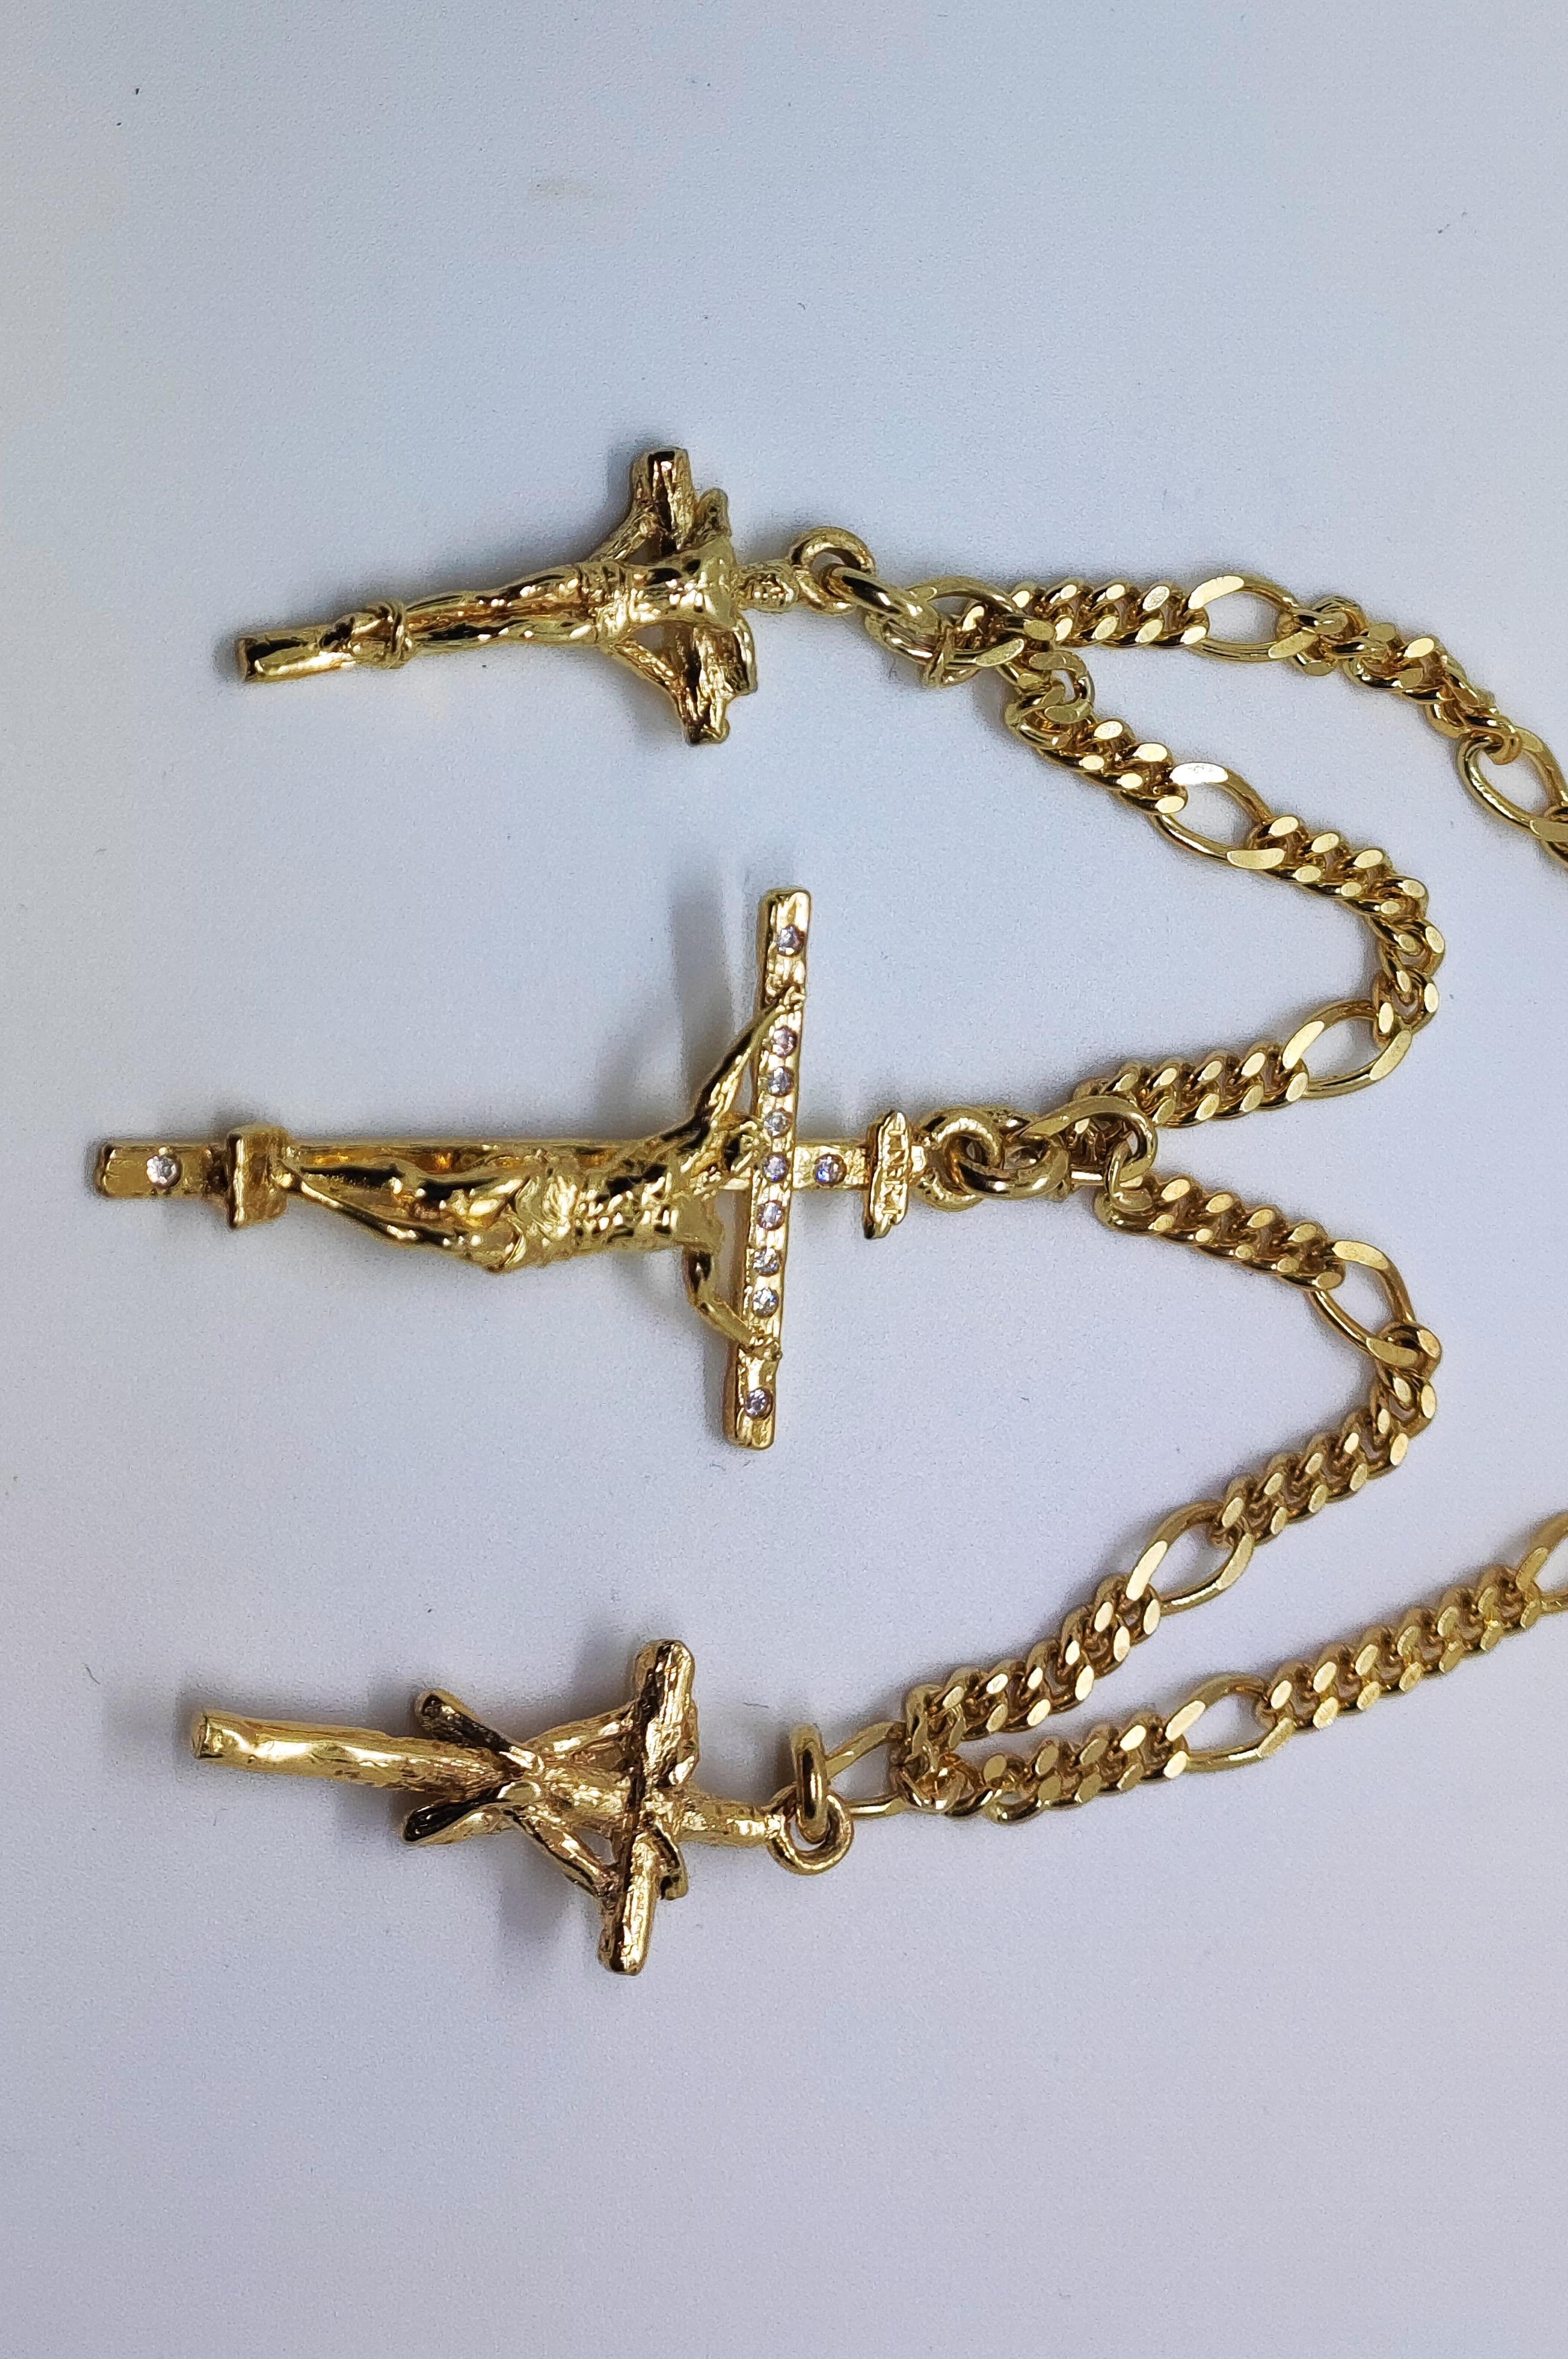 14 Carat Crosses Gold and Diamonds Necklace 